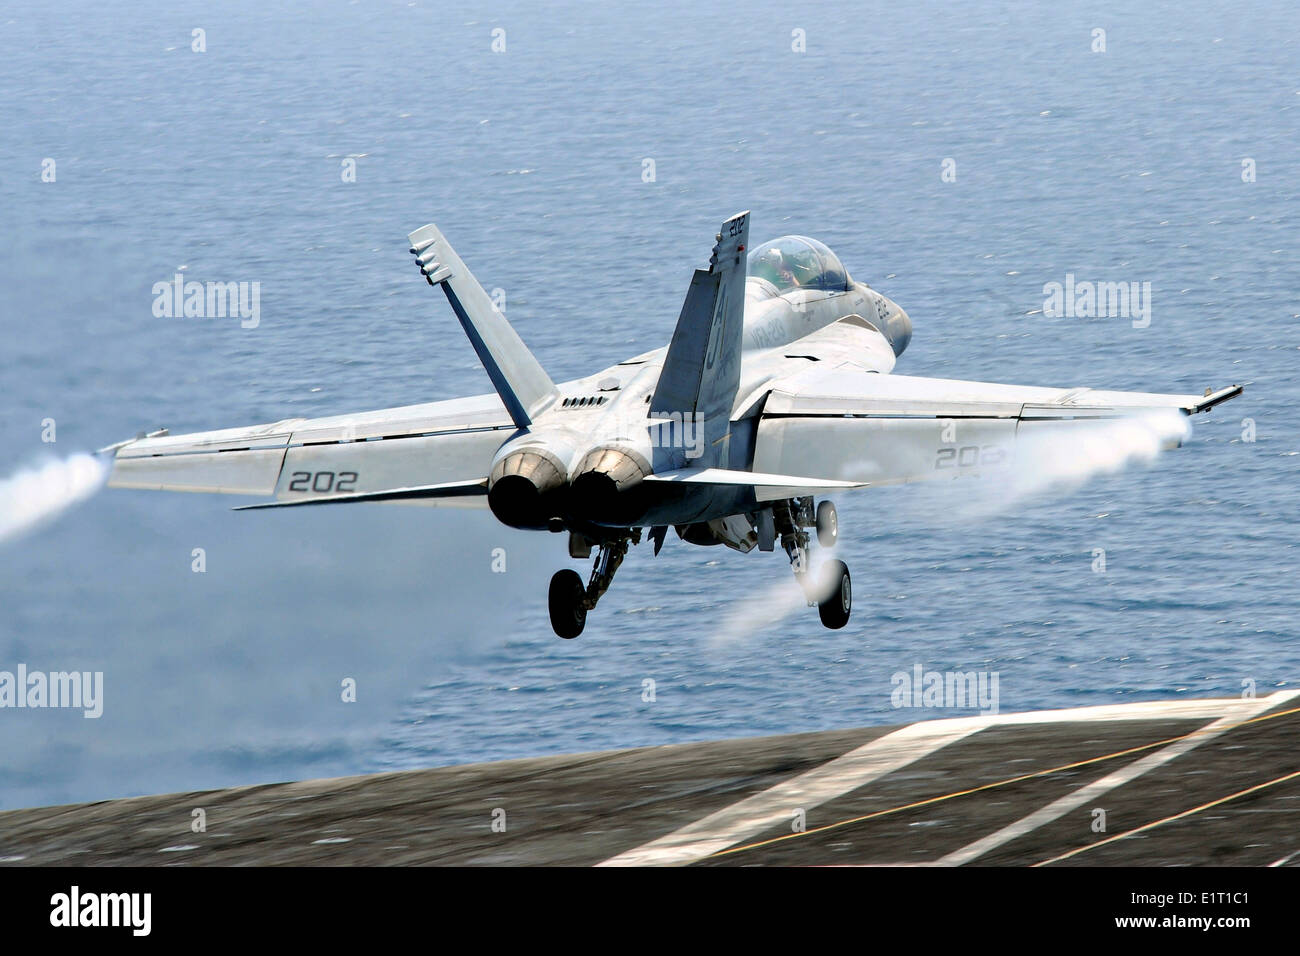 A US Navy F/A-18F Super Hornet fighter aircraft launches position from the flight deck of aircraft carrier USS George H.W. Bush June 7, 2014 in the Arabian Sea. Stock Photo